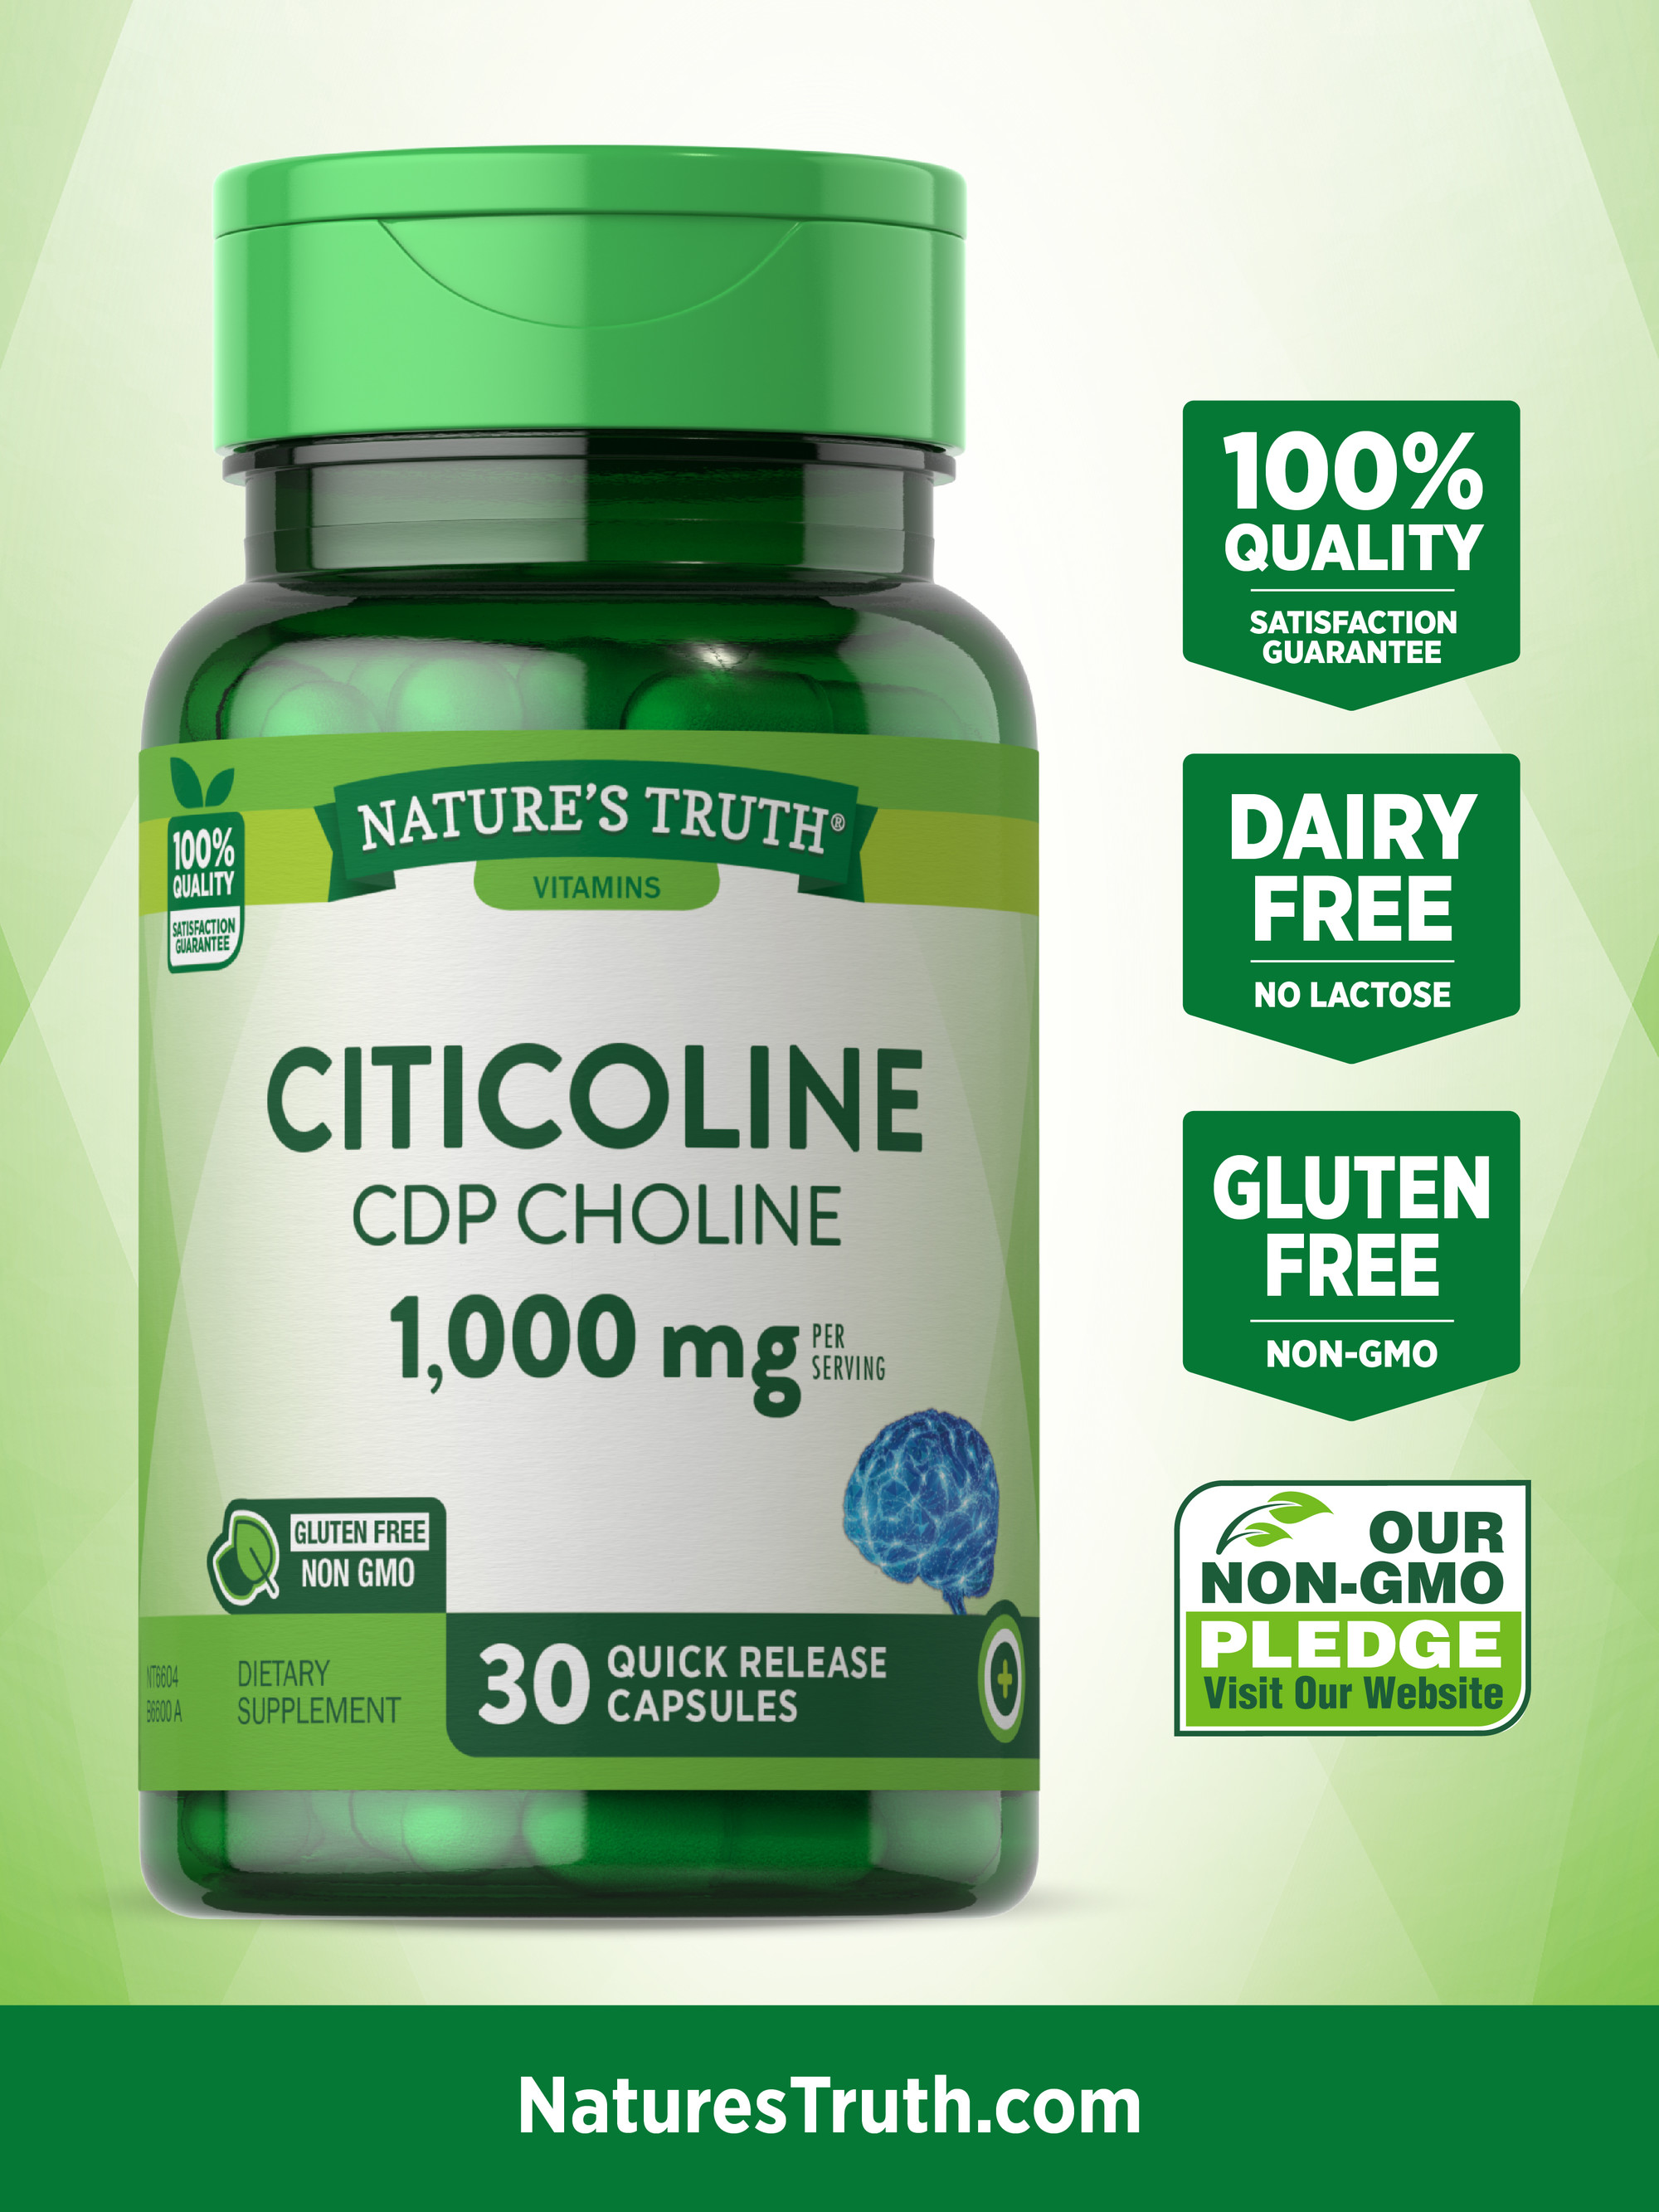 Citicoline 1000mg | 30 Capsules | CDP Choline | Non-GMO & Gluten Free Supplement | by Nature's Truth - image 2 of 6